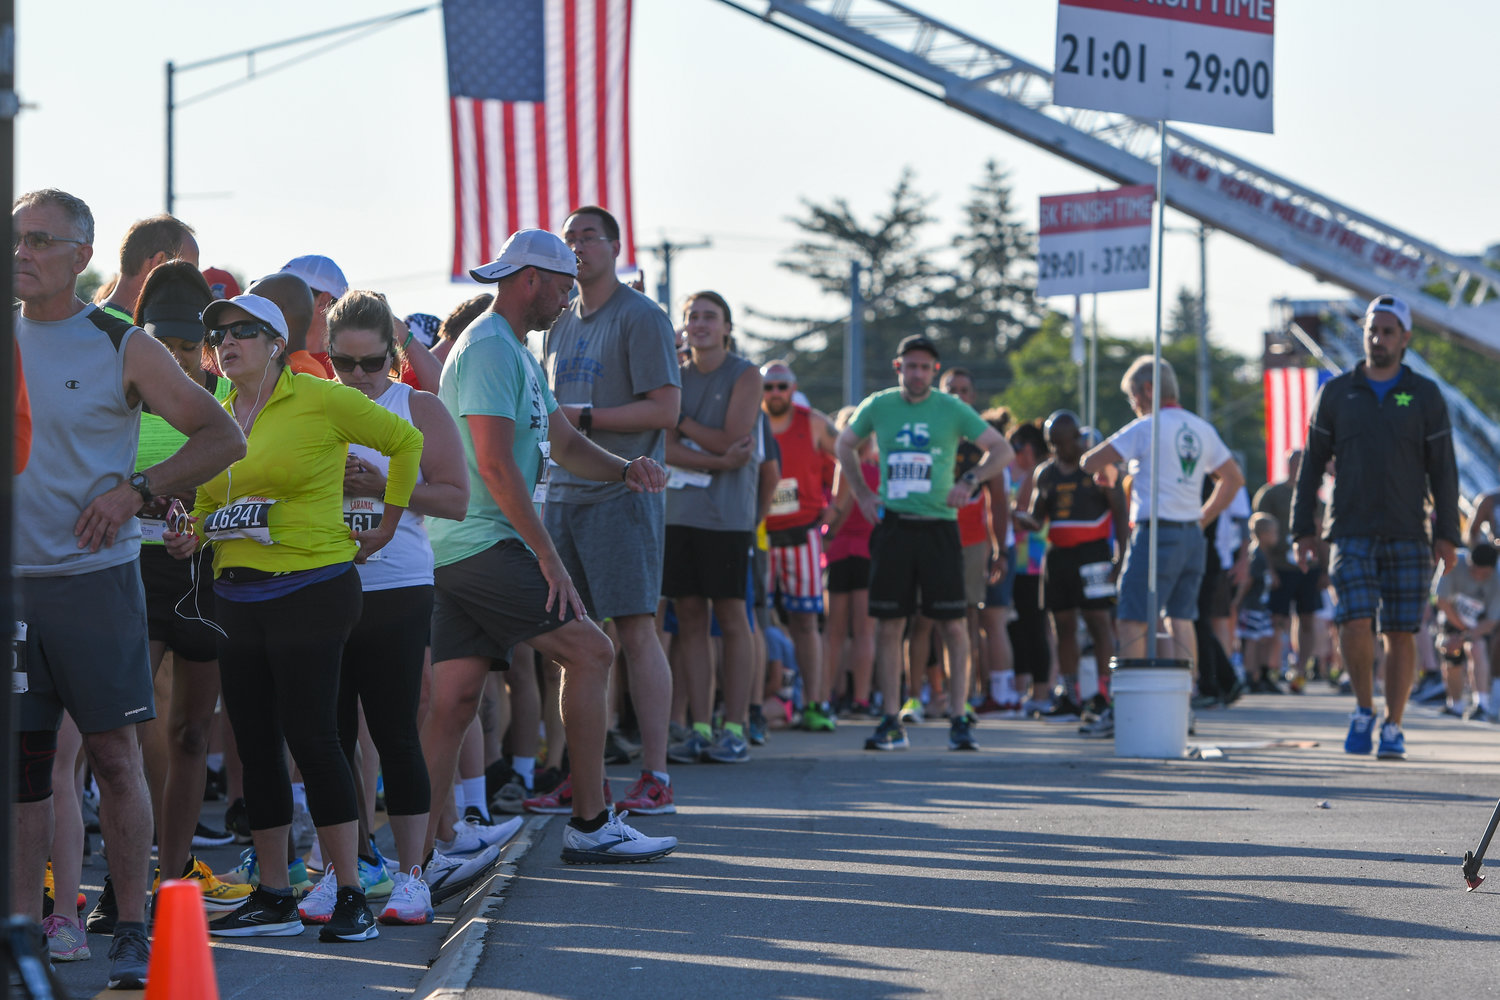 The crowd was massive and spirits were high as 2022 Boilermaker 5K competitors made their mark for the start of the race. Over 2,000 runners participated in the 5K.